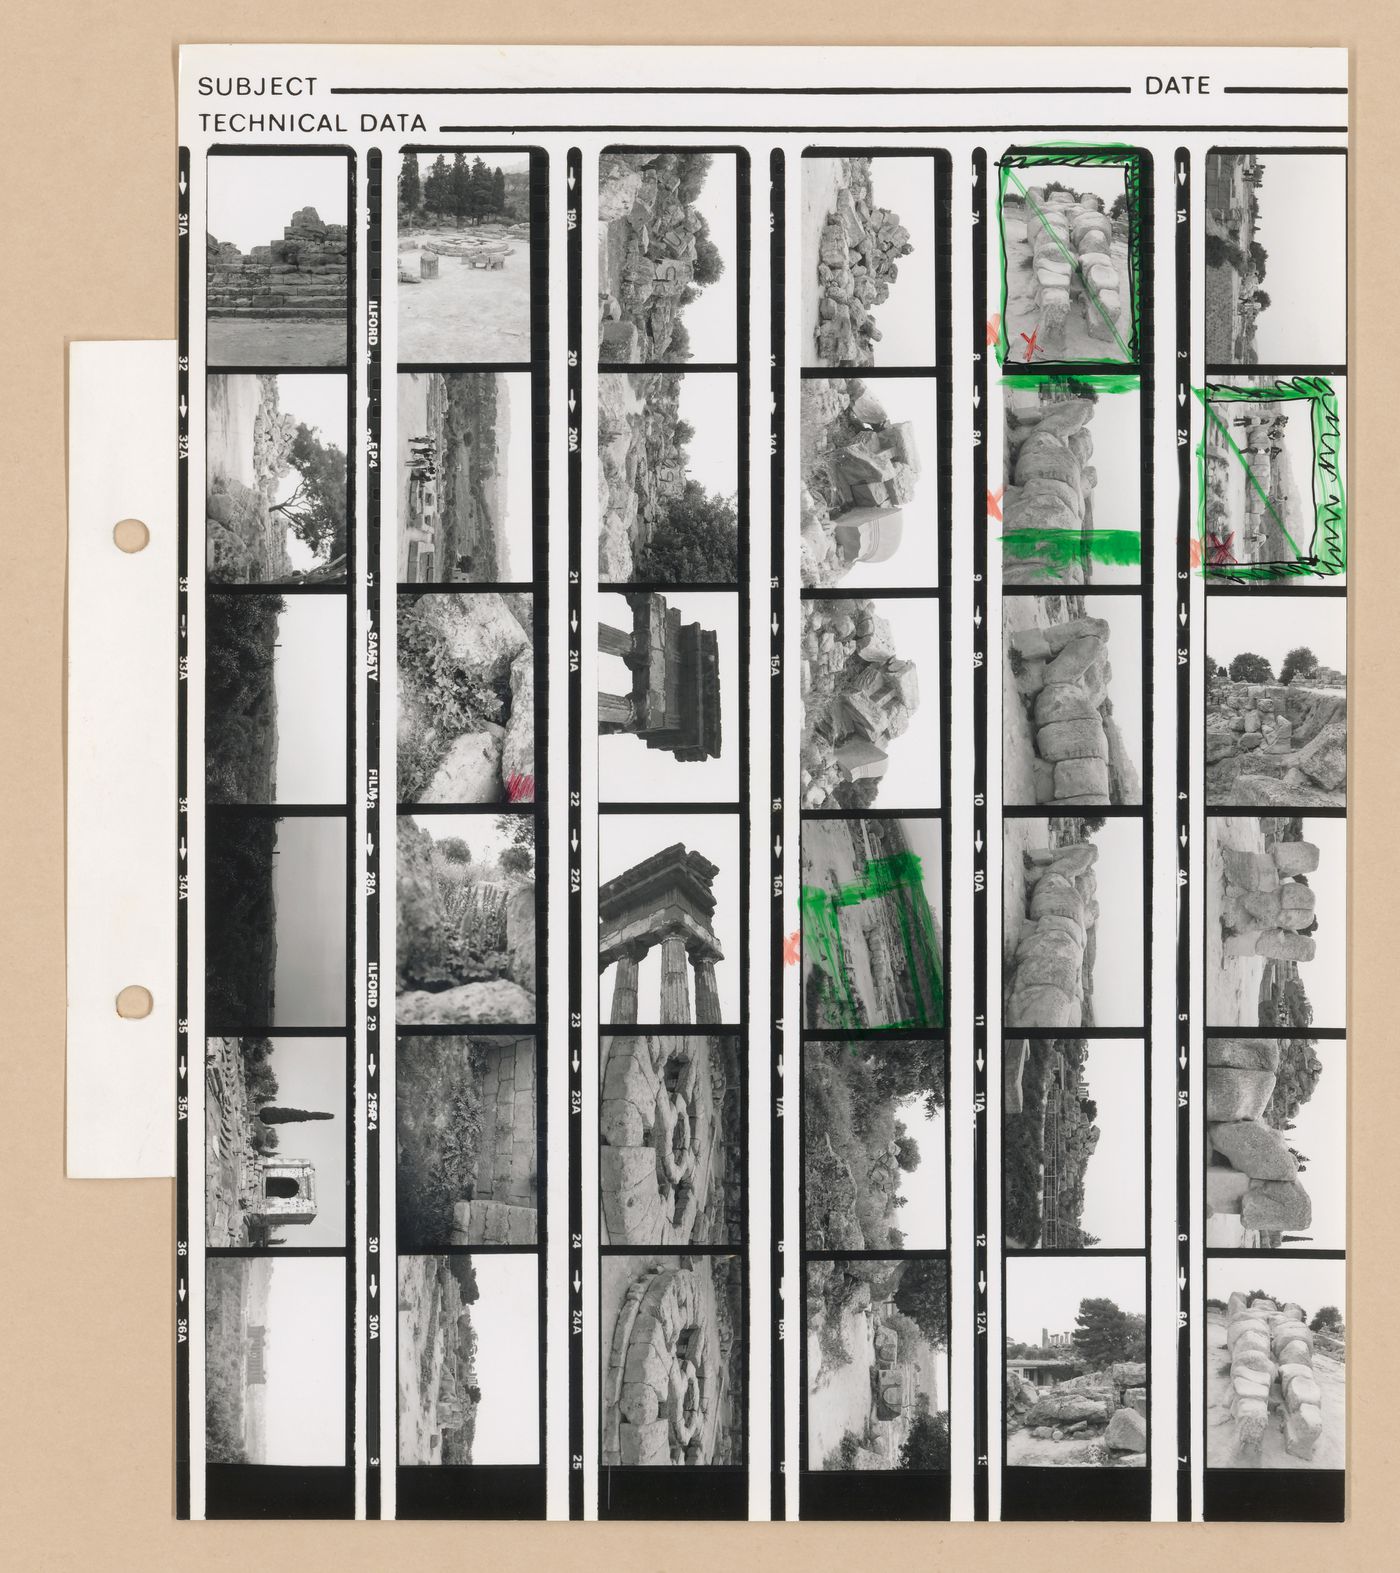 Contact sheet from photographic album, Turkey